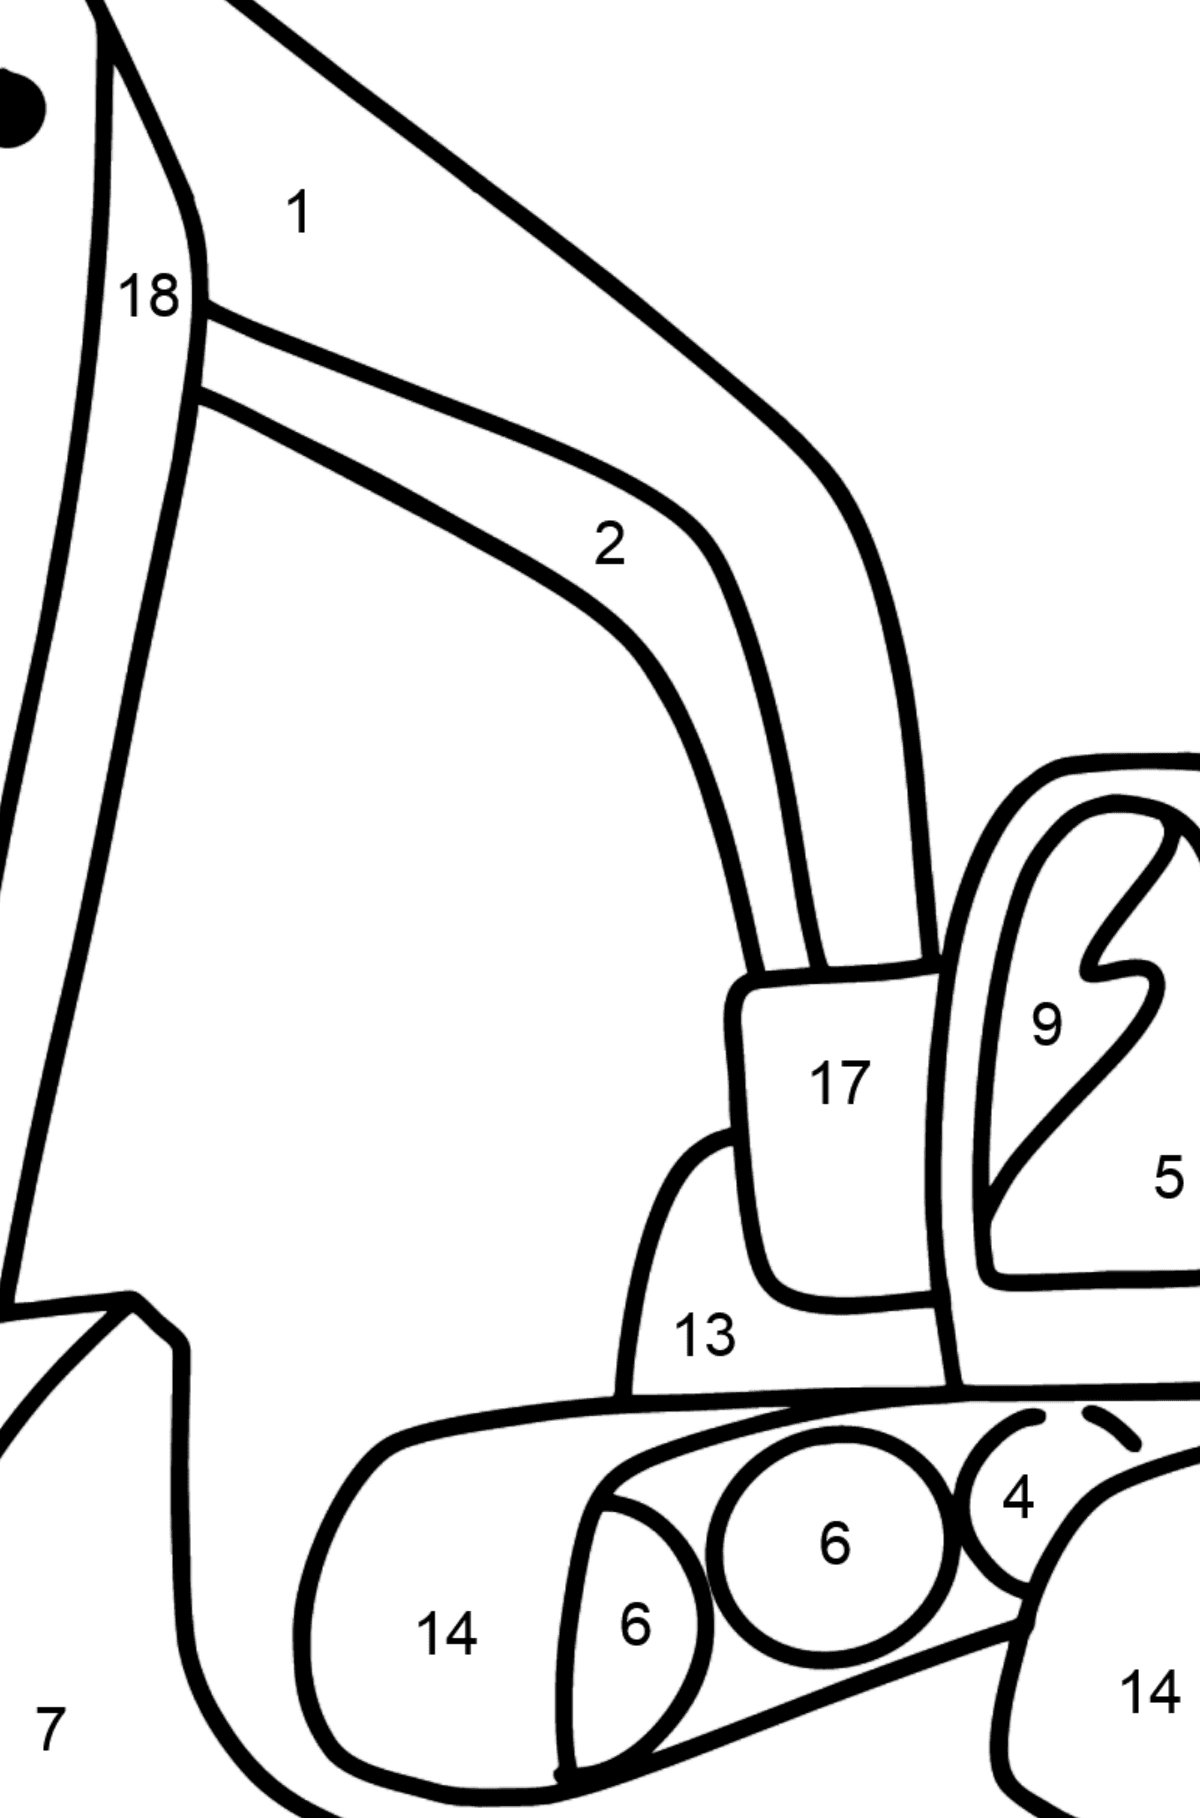 Tractor Excavator coloring page - Coloring by Numbers for Kids